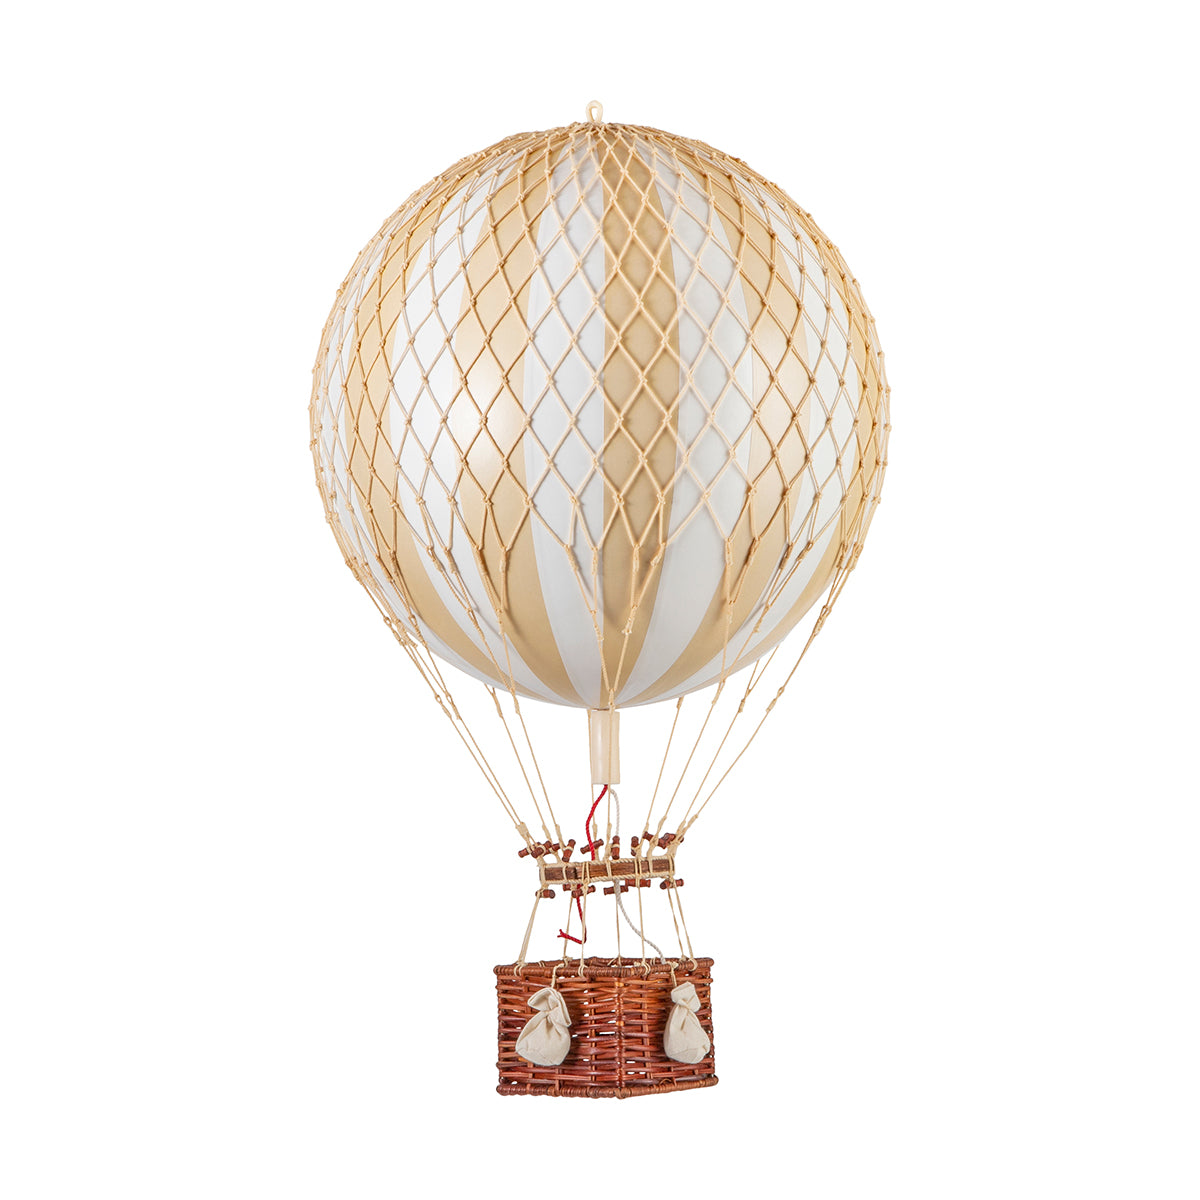 Soar to new heights and embrace a unique perspective with a Wonderen Medium Hot Air Balloon - Royal Aero gently floating in the sky, its passengers nestled in a cozy wicker basket.